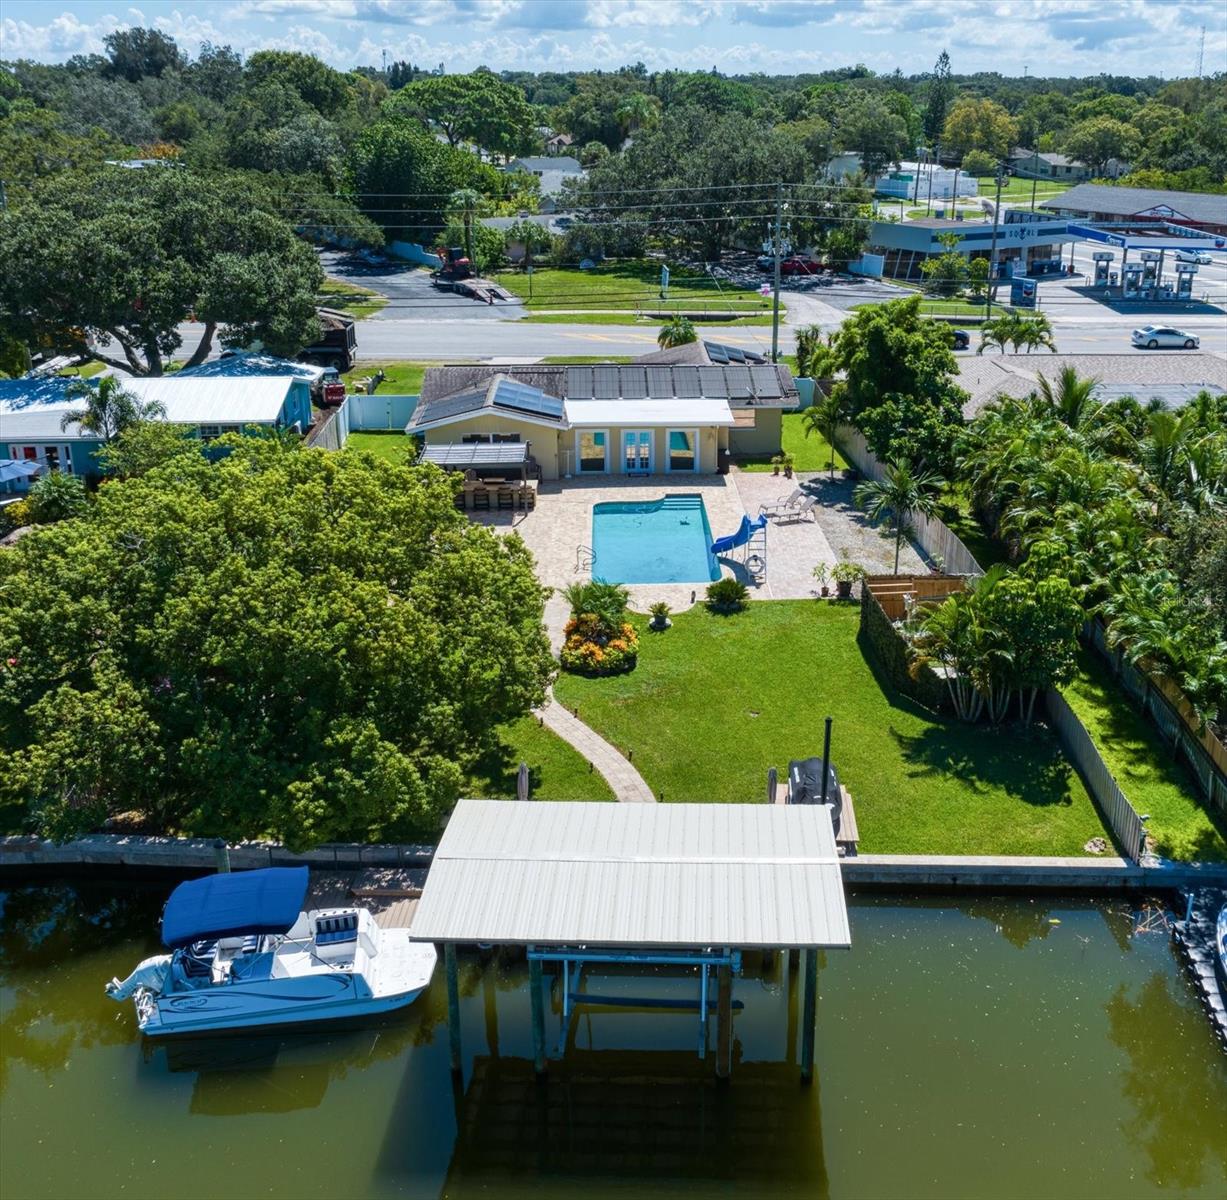 Superb dockage set up with rare covered boat house, floating dock and lift.